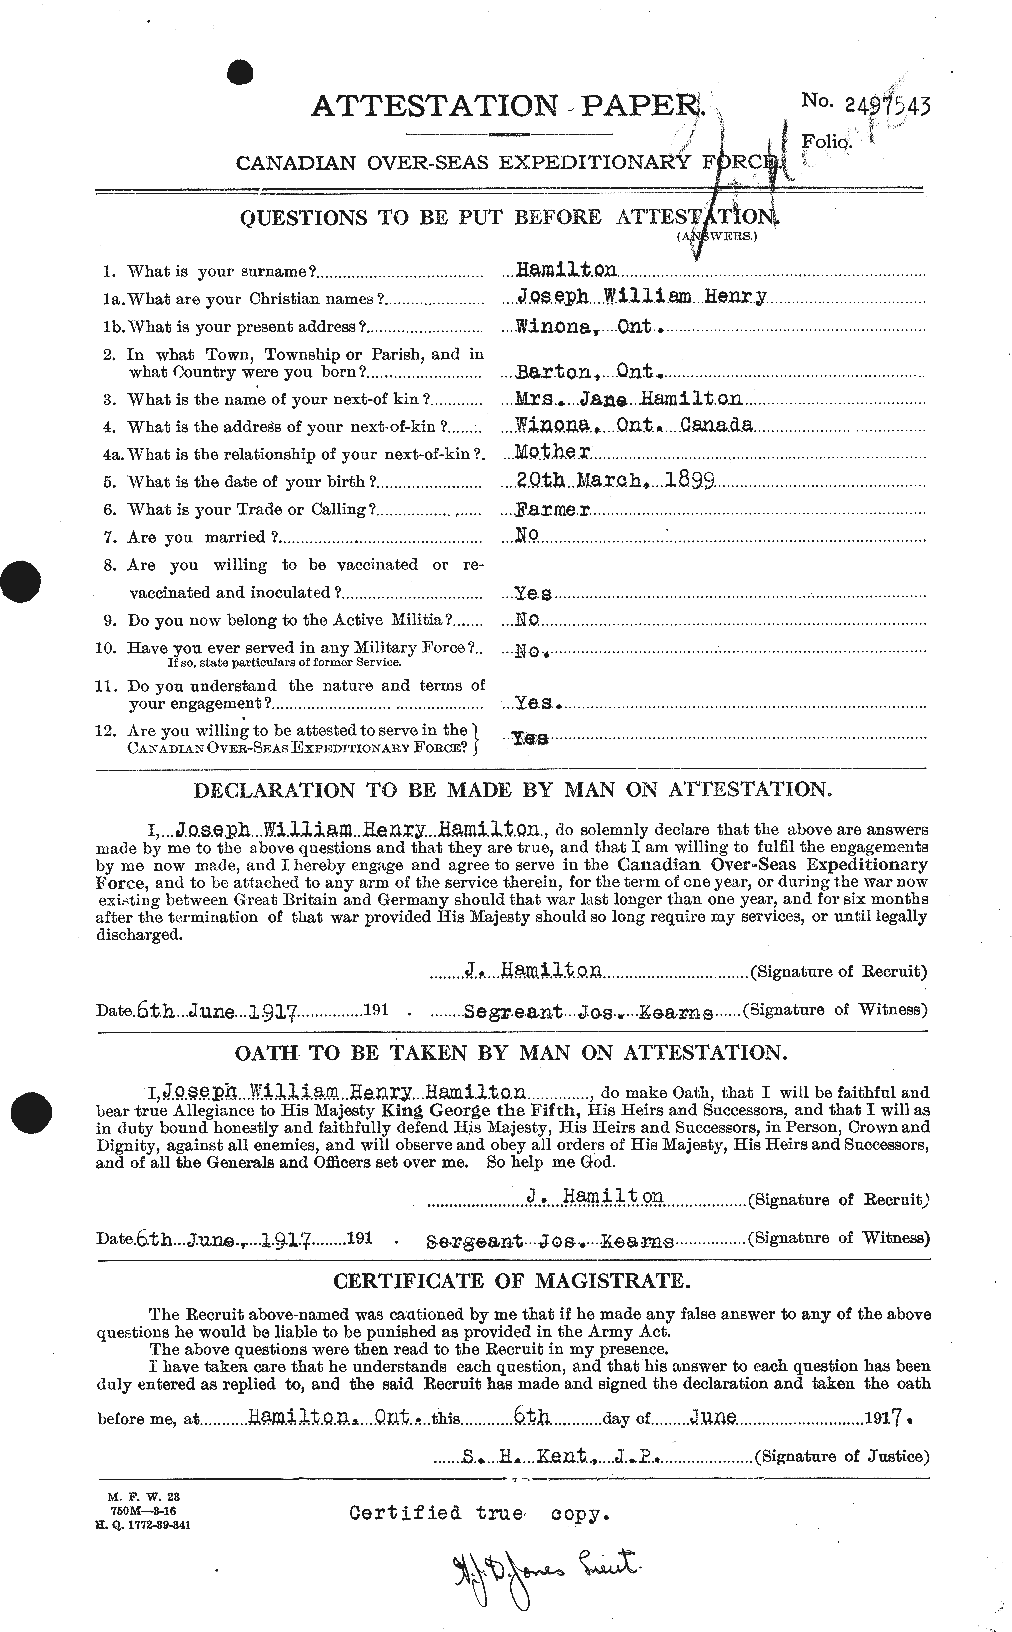 Personnel Records of the First World War - CEF 373147a